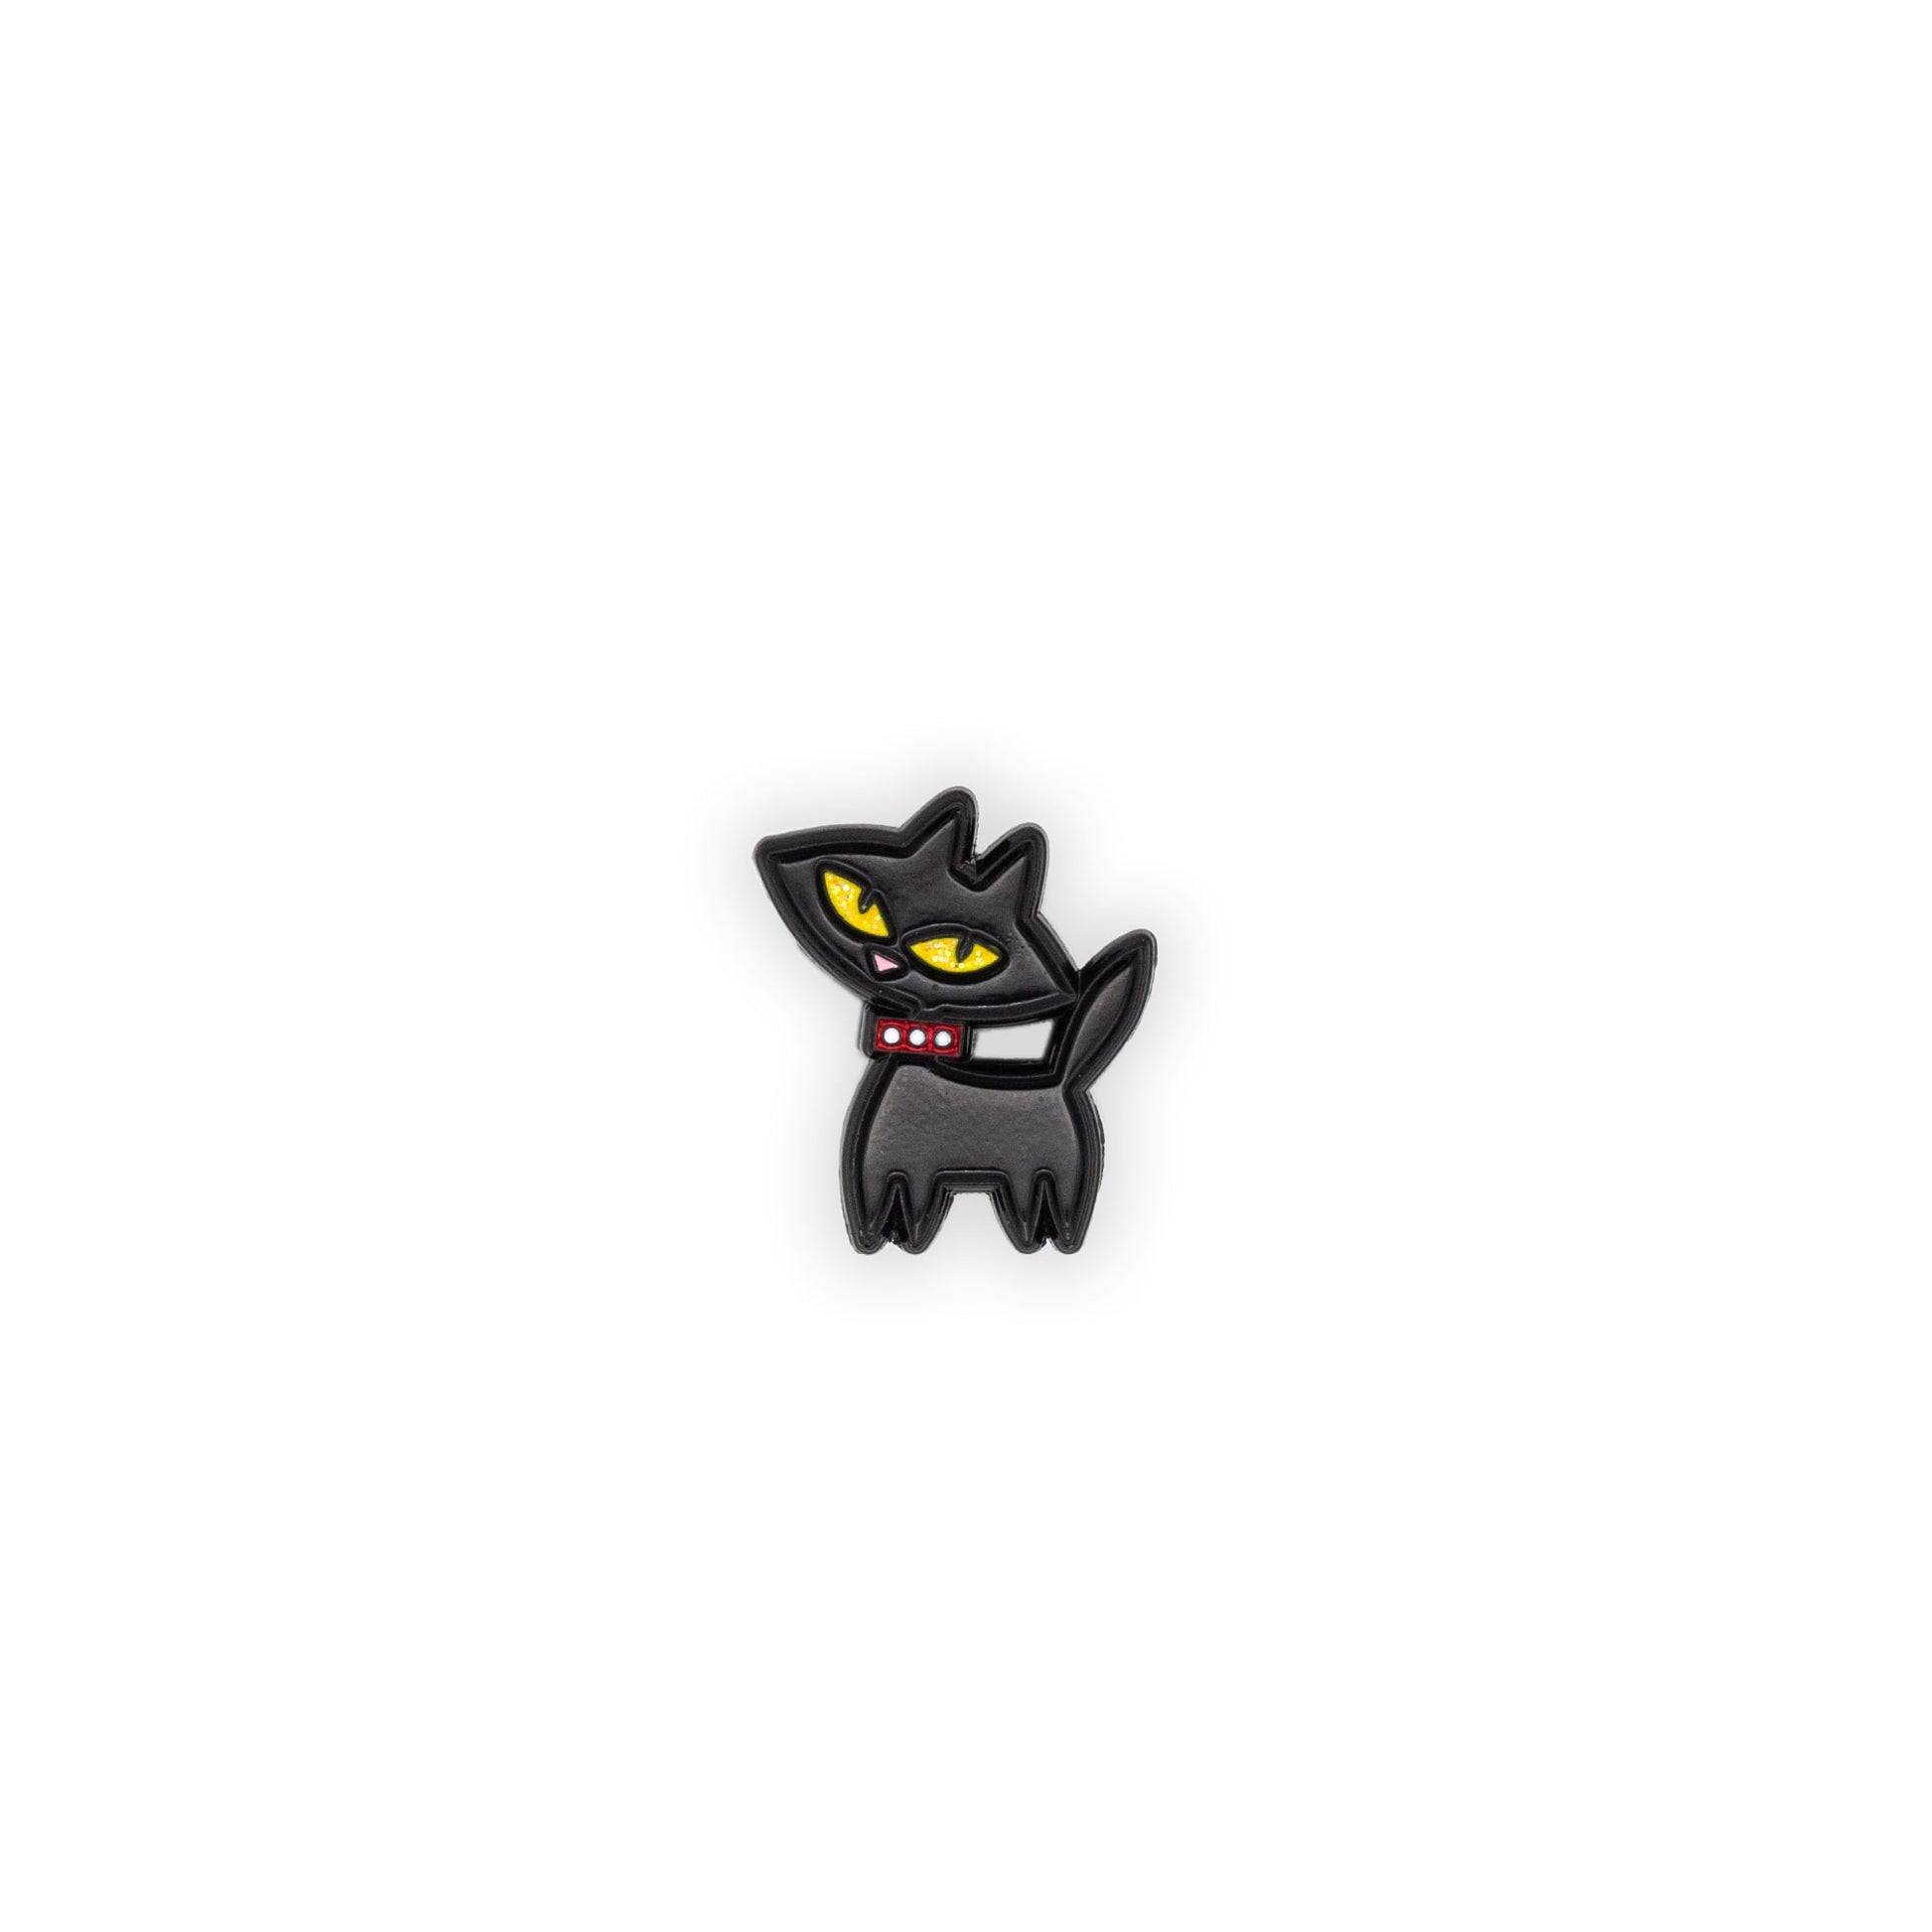 mika cat is a black cat with yellow eyes and a red collar, the limited edition has yellow glitter eyes and is numbered on the back.